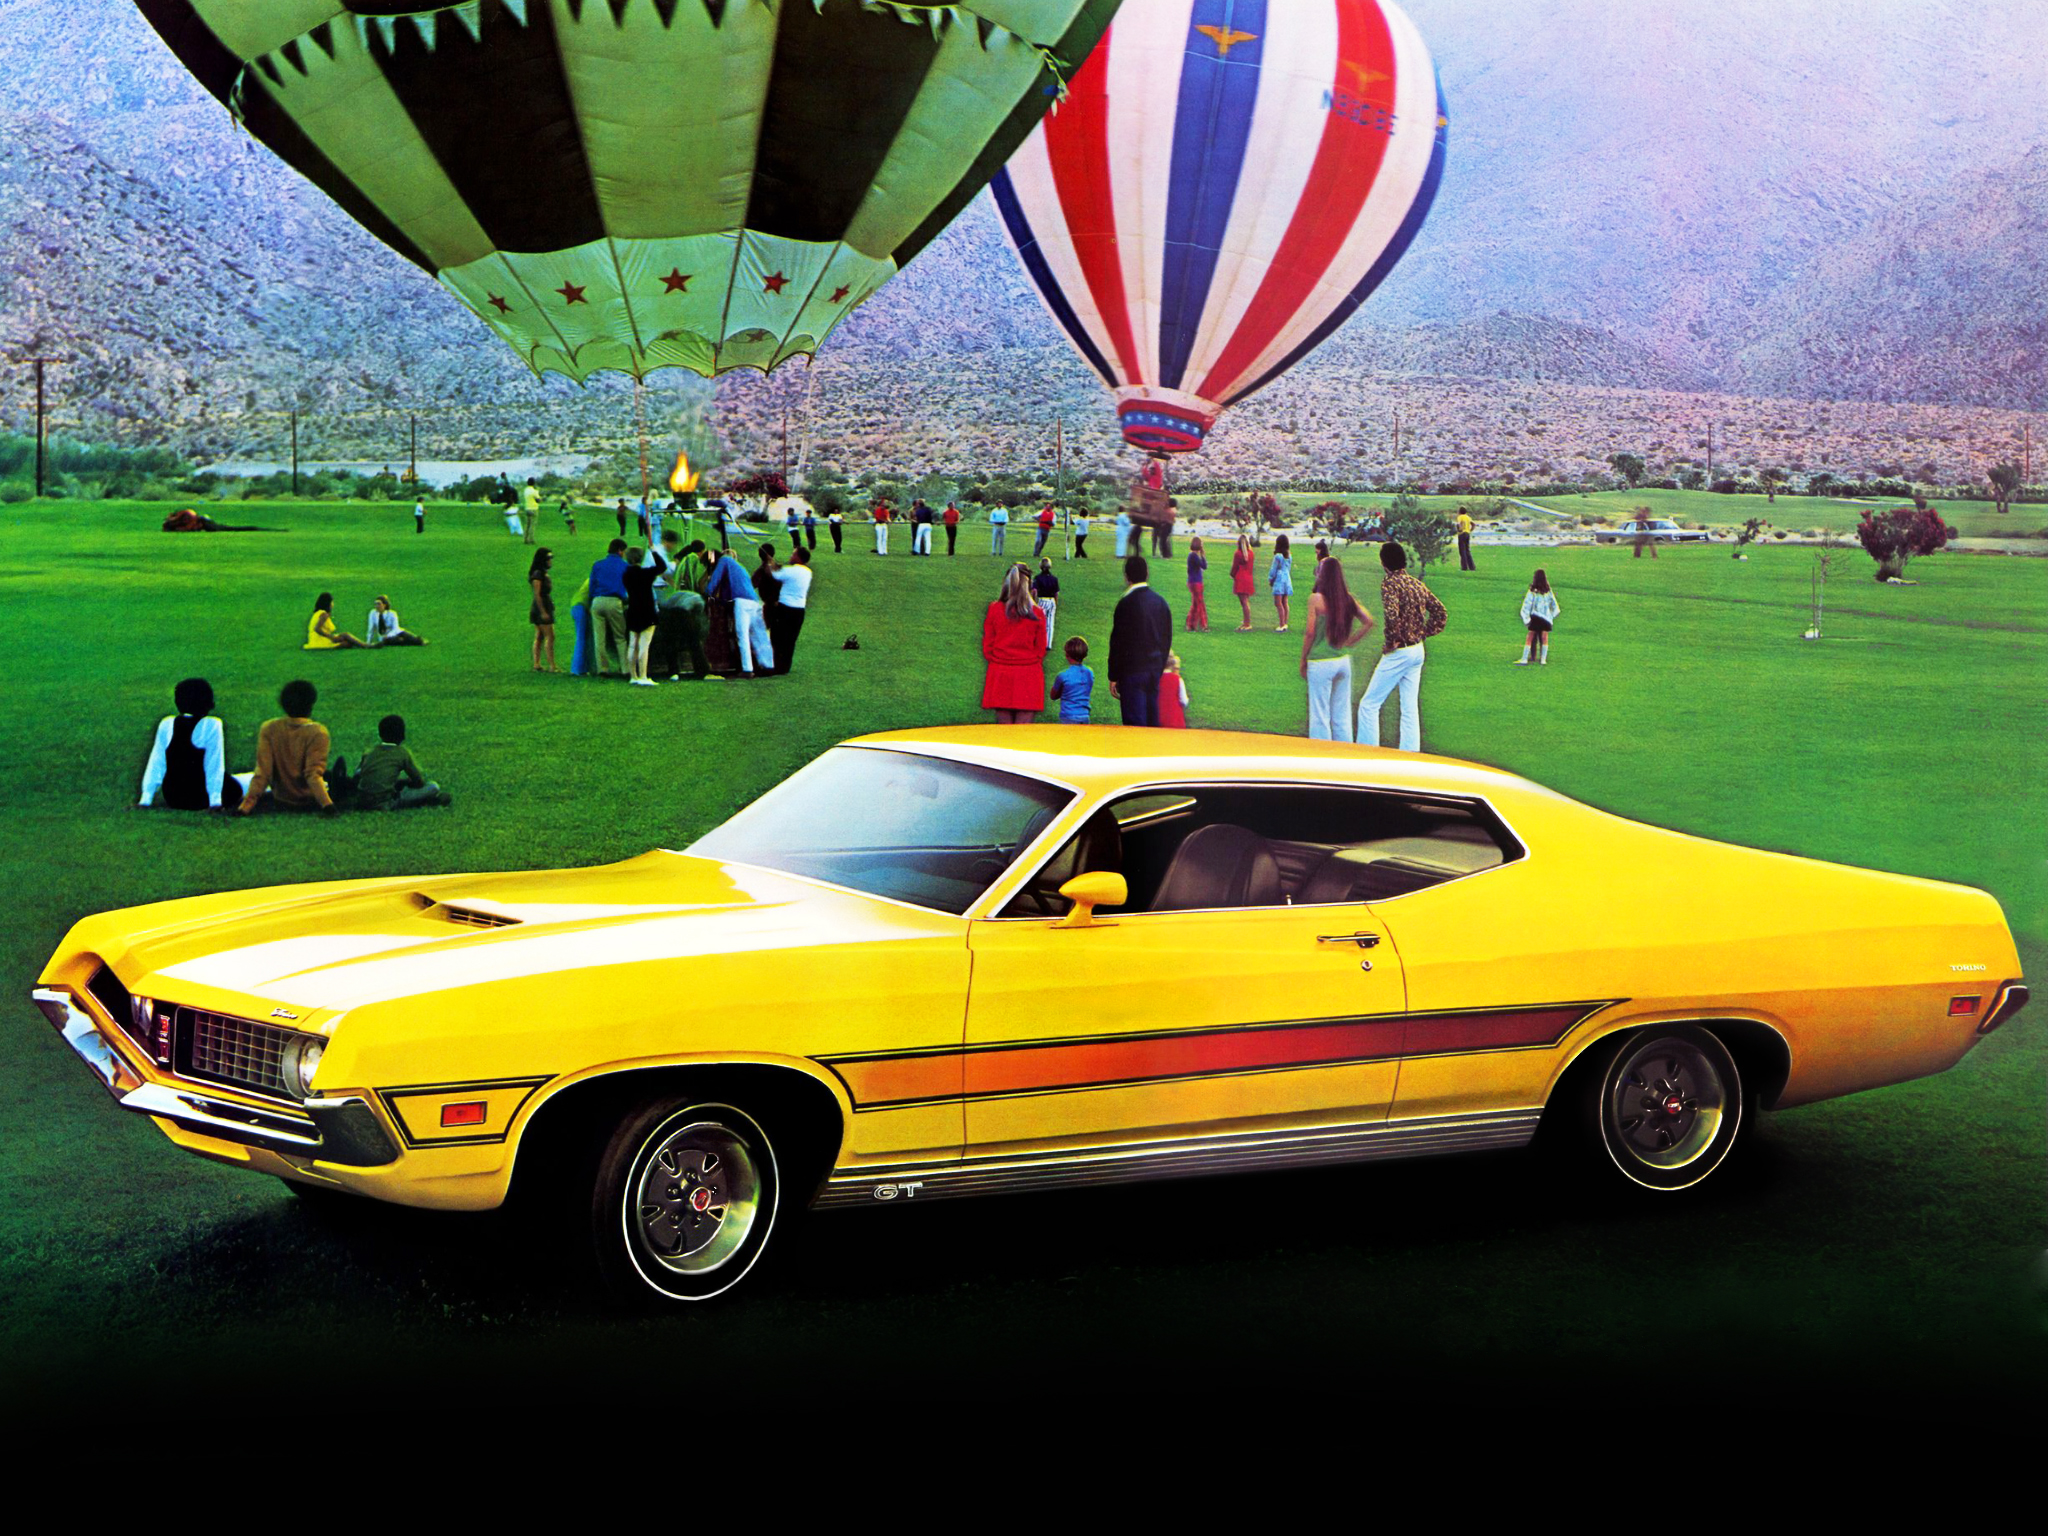 vehicles, ford, balloon, ford torino cobra, people